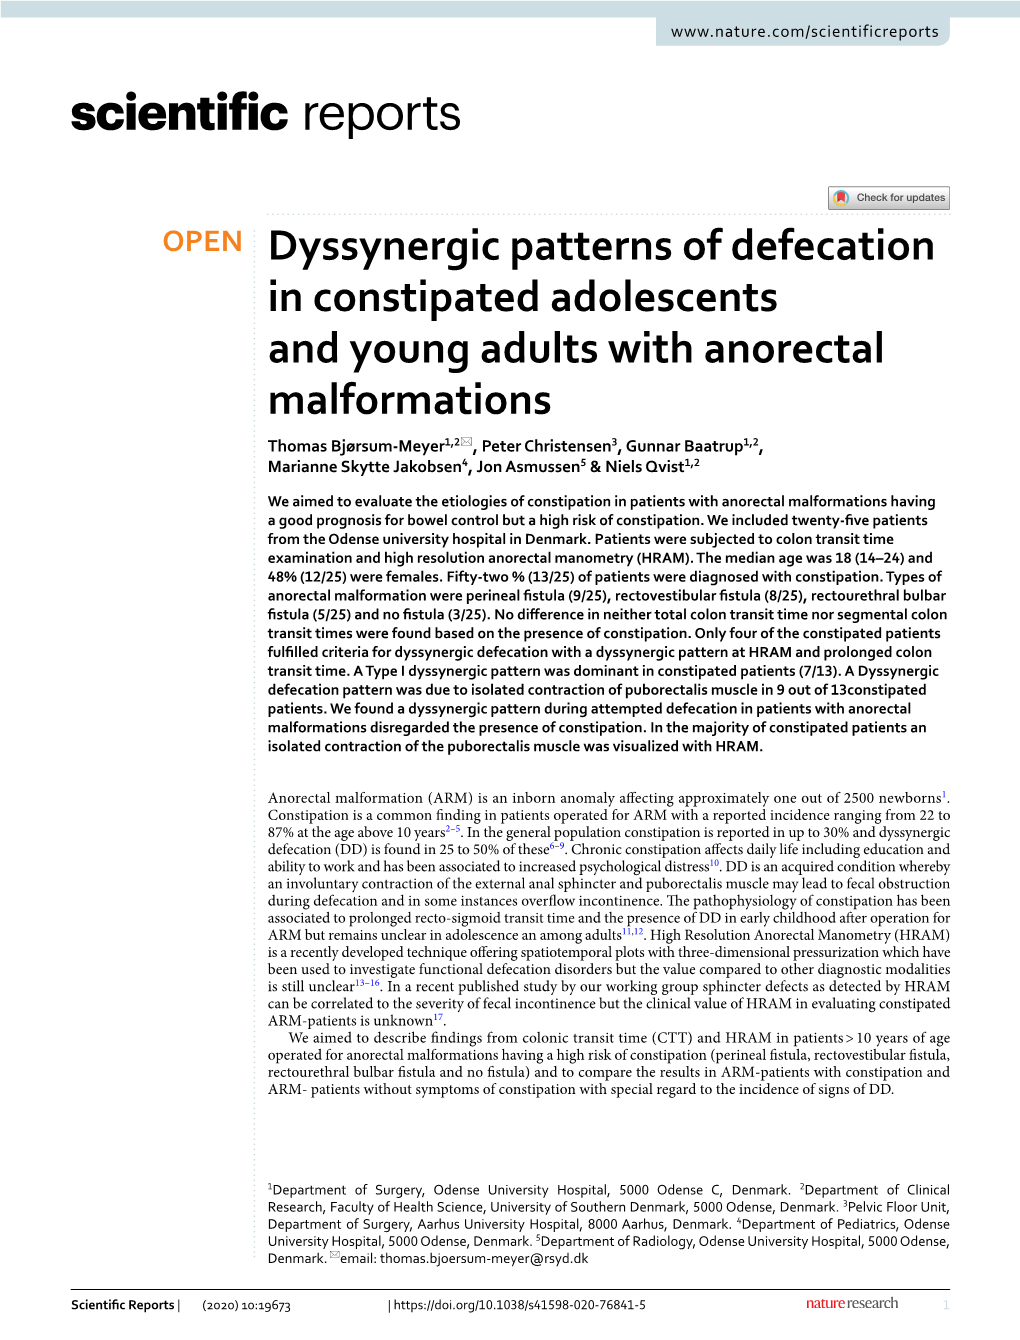 Dyssynergic Patterns of Defecation in Constipated Adolescents and Young Adults with Anorectal Malformations